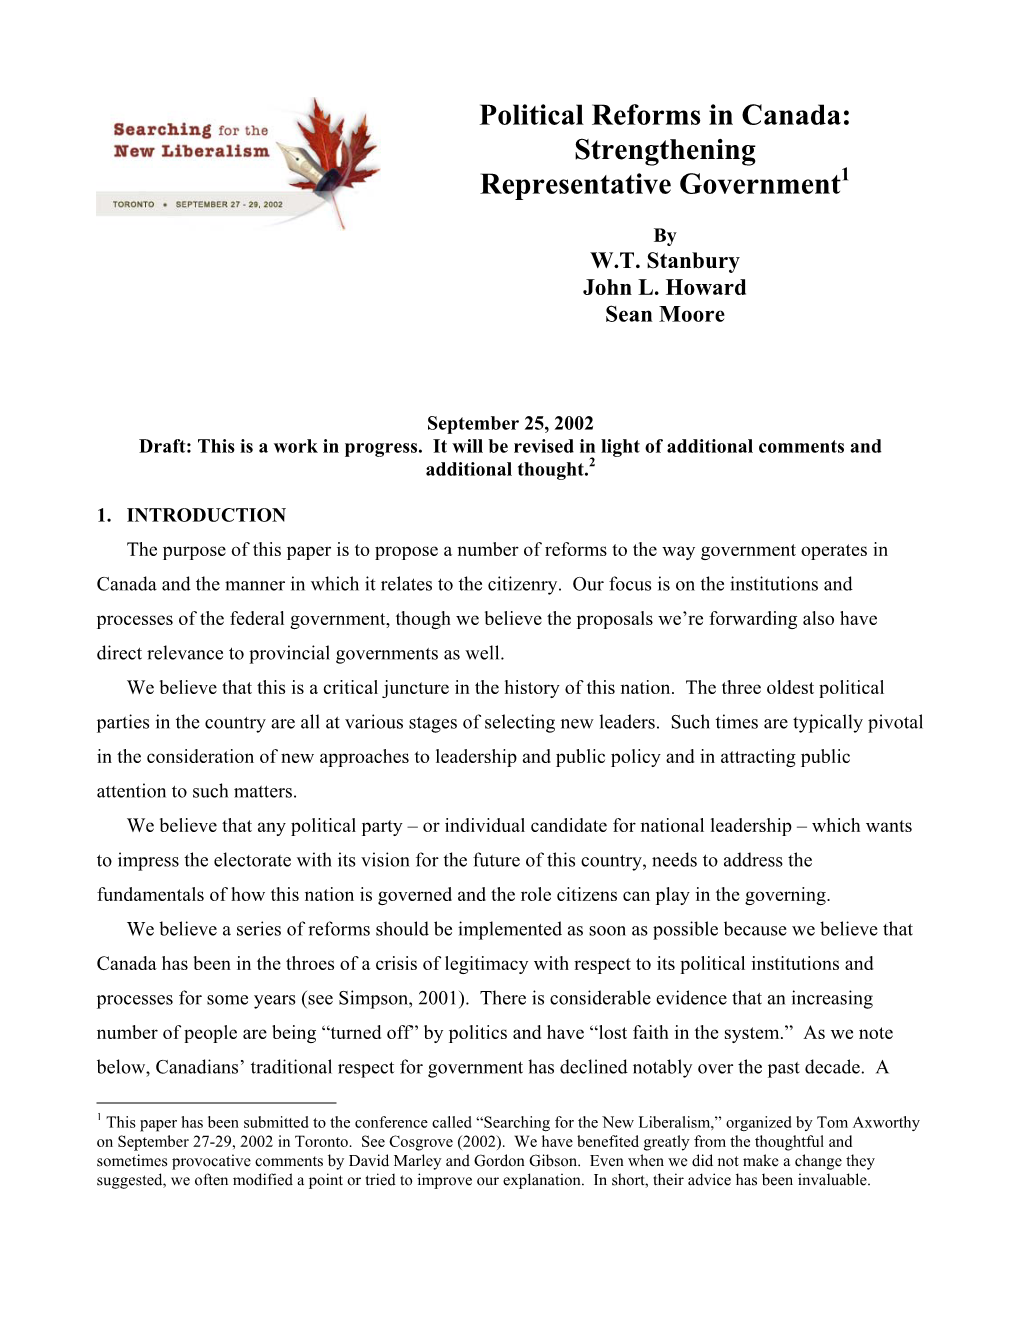 Political Reforms in Canada: Strengthening Representative Government1